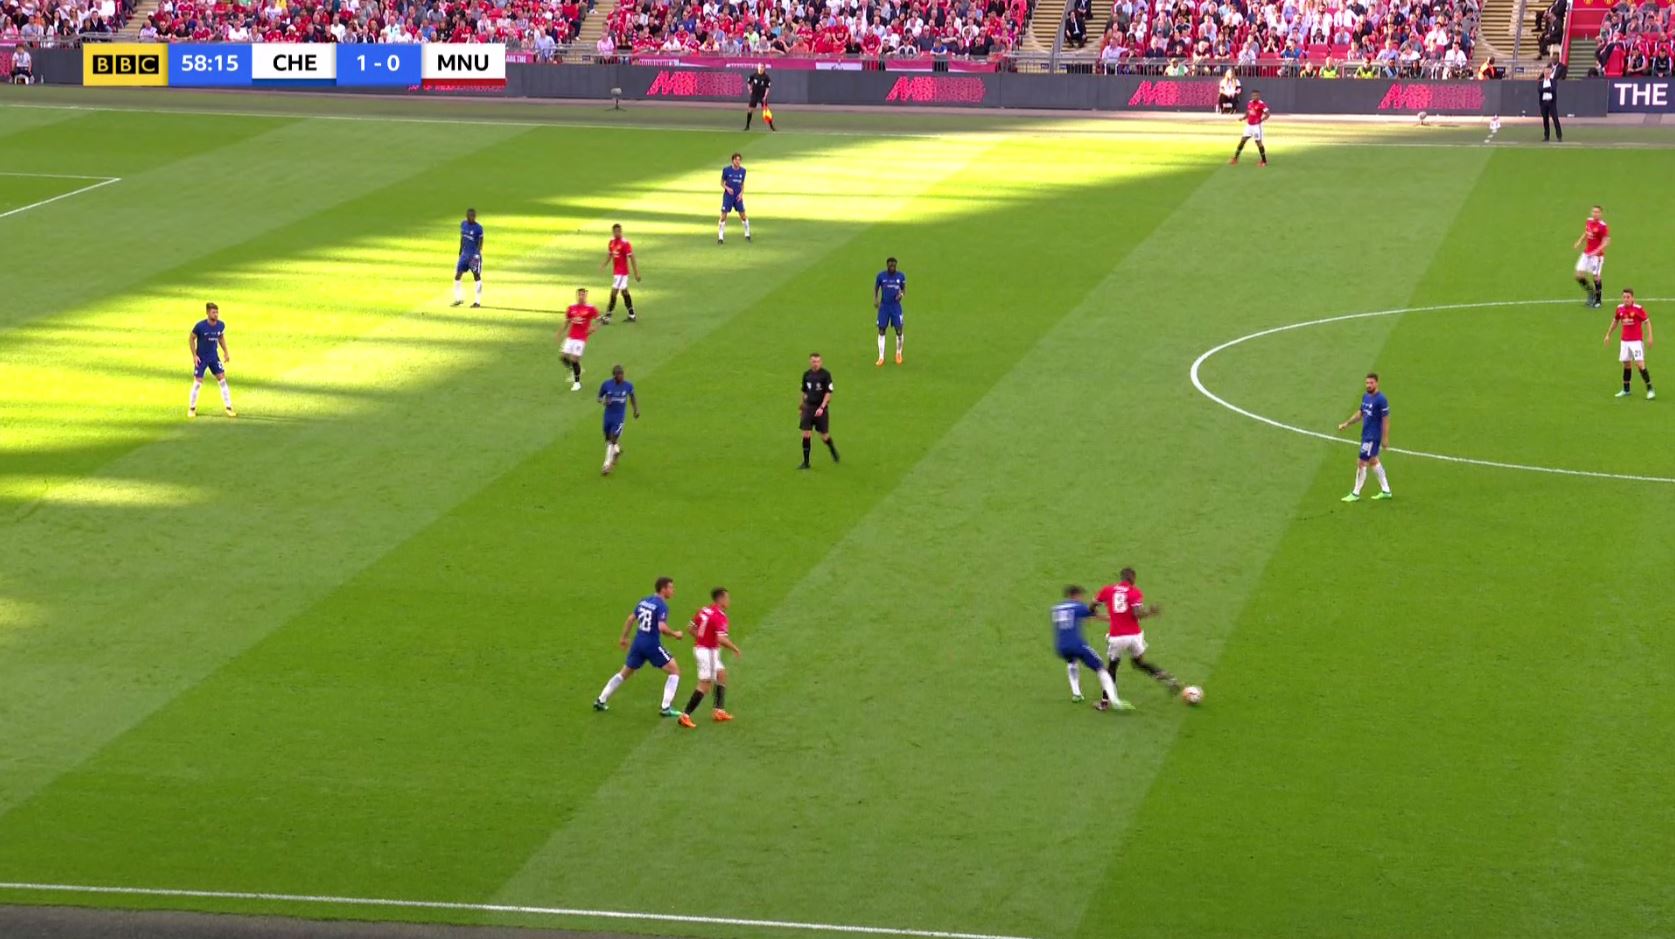 Pogba was forced to step in and fend off Cesc Fabregas. (BBC)